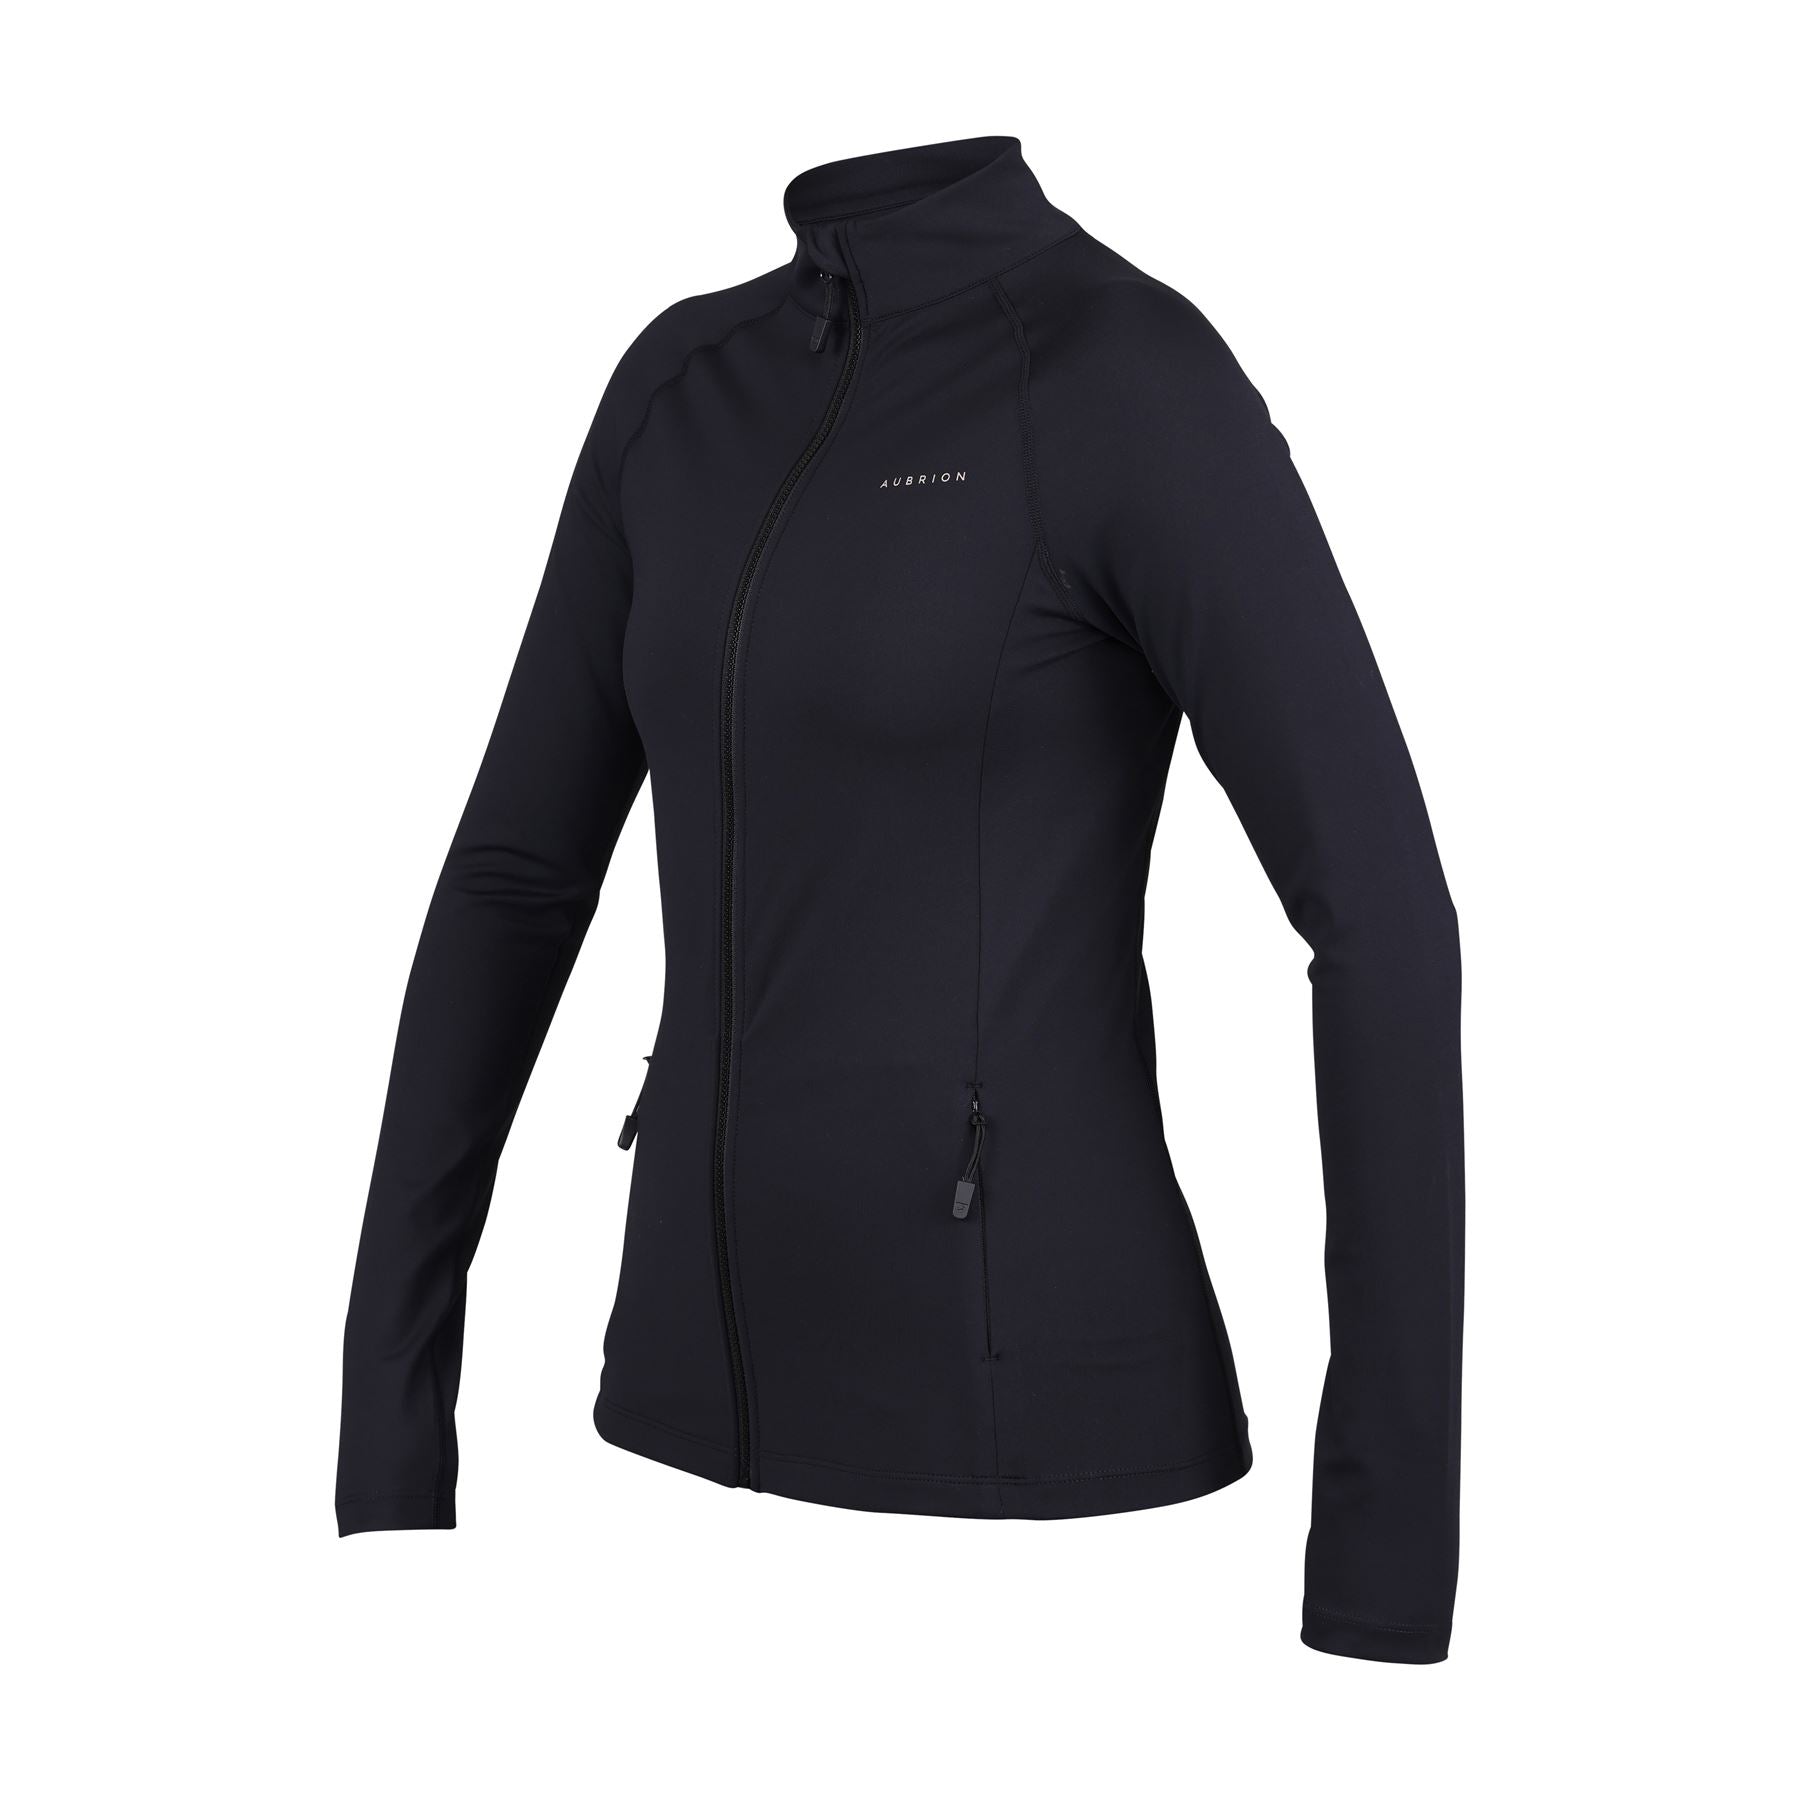 Aubrion Non-Stop Jacket - Just Horse Riders